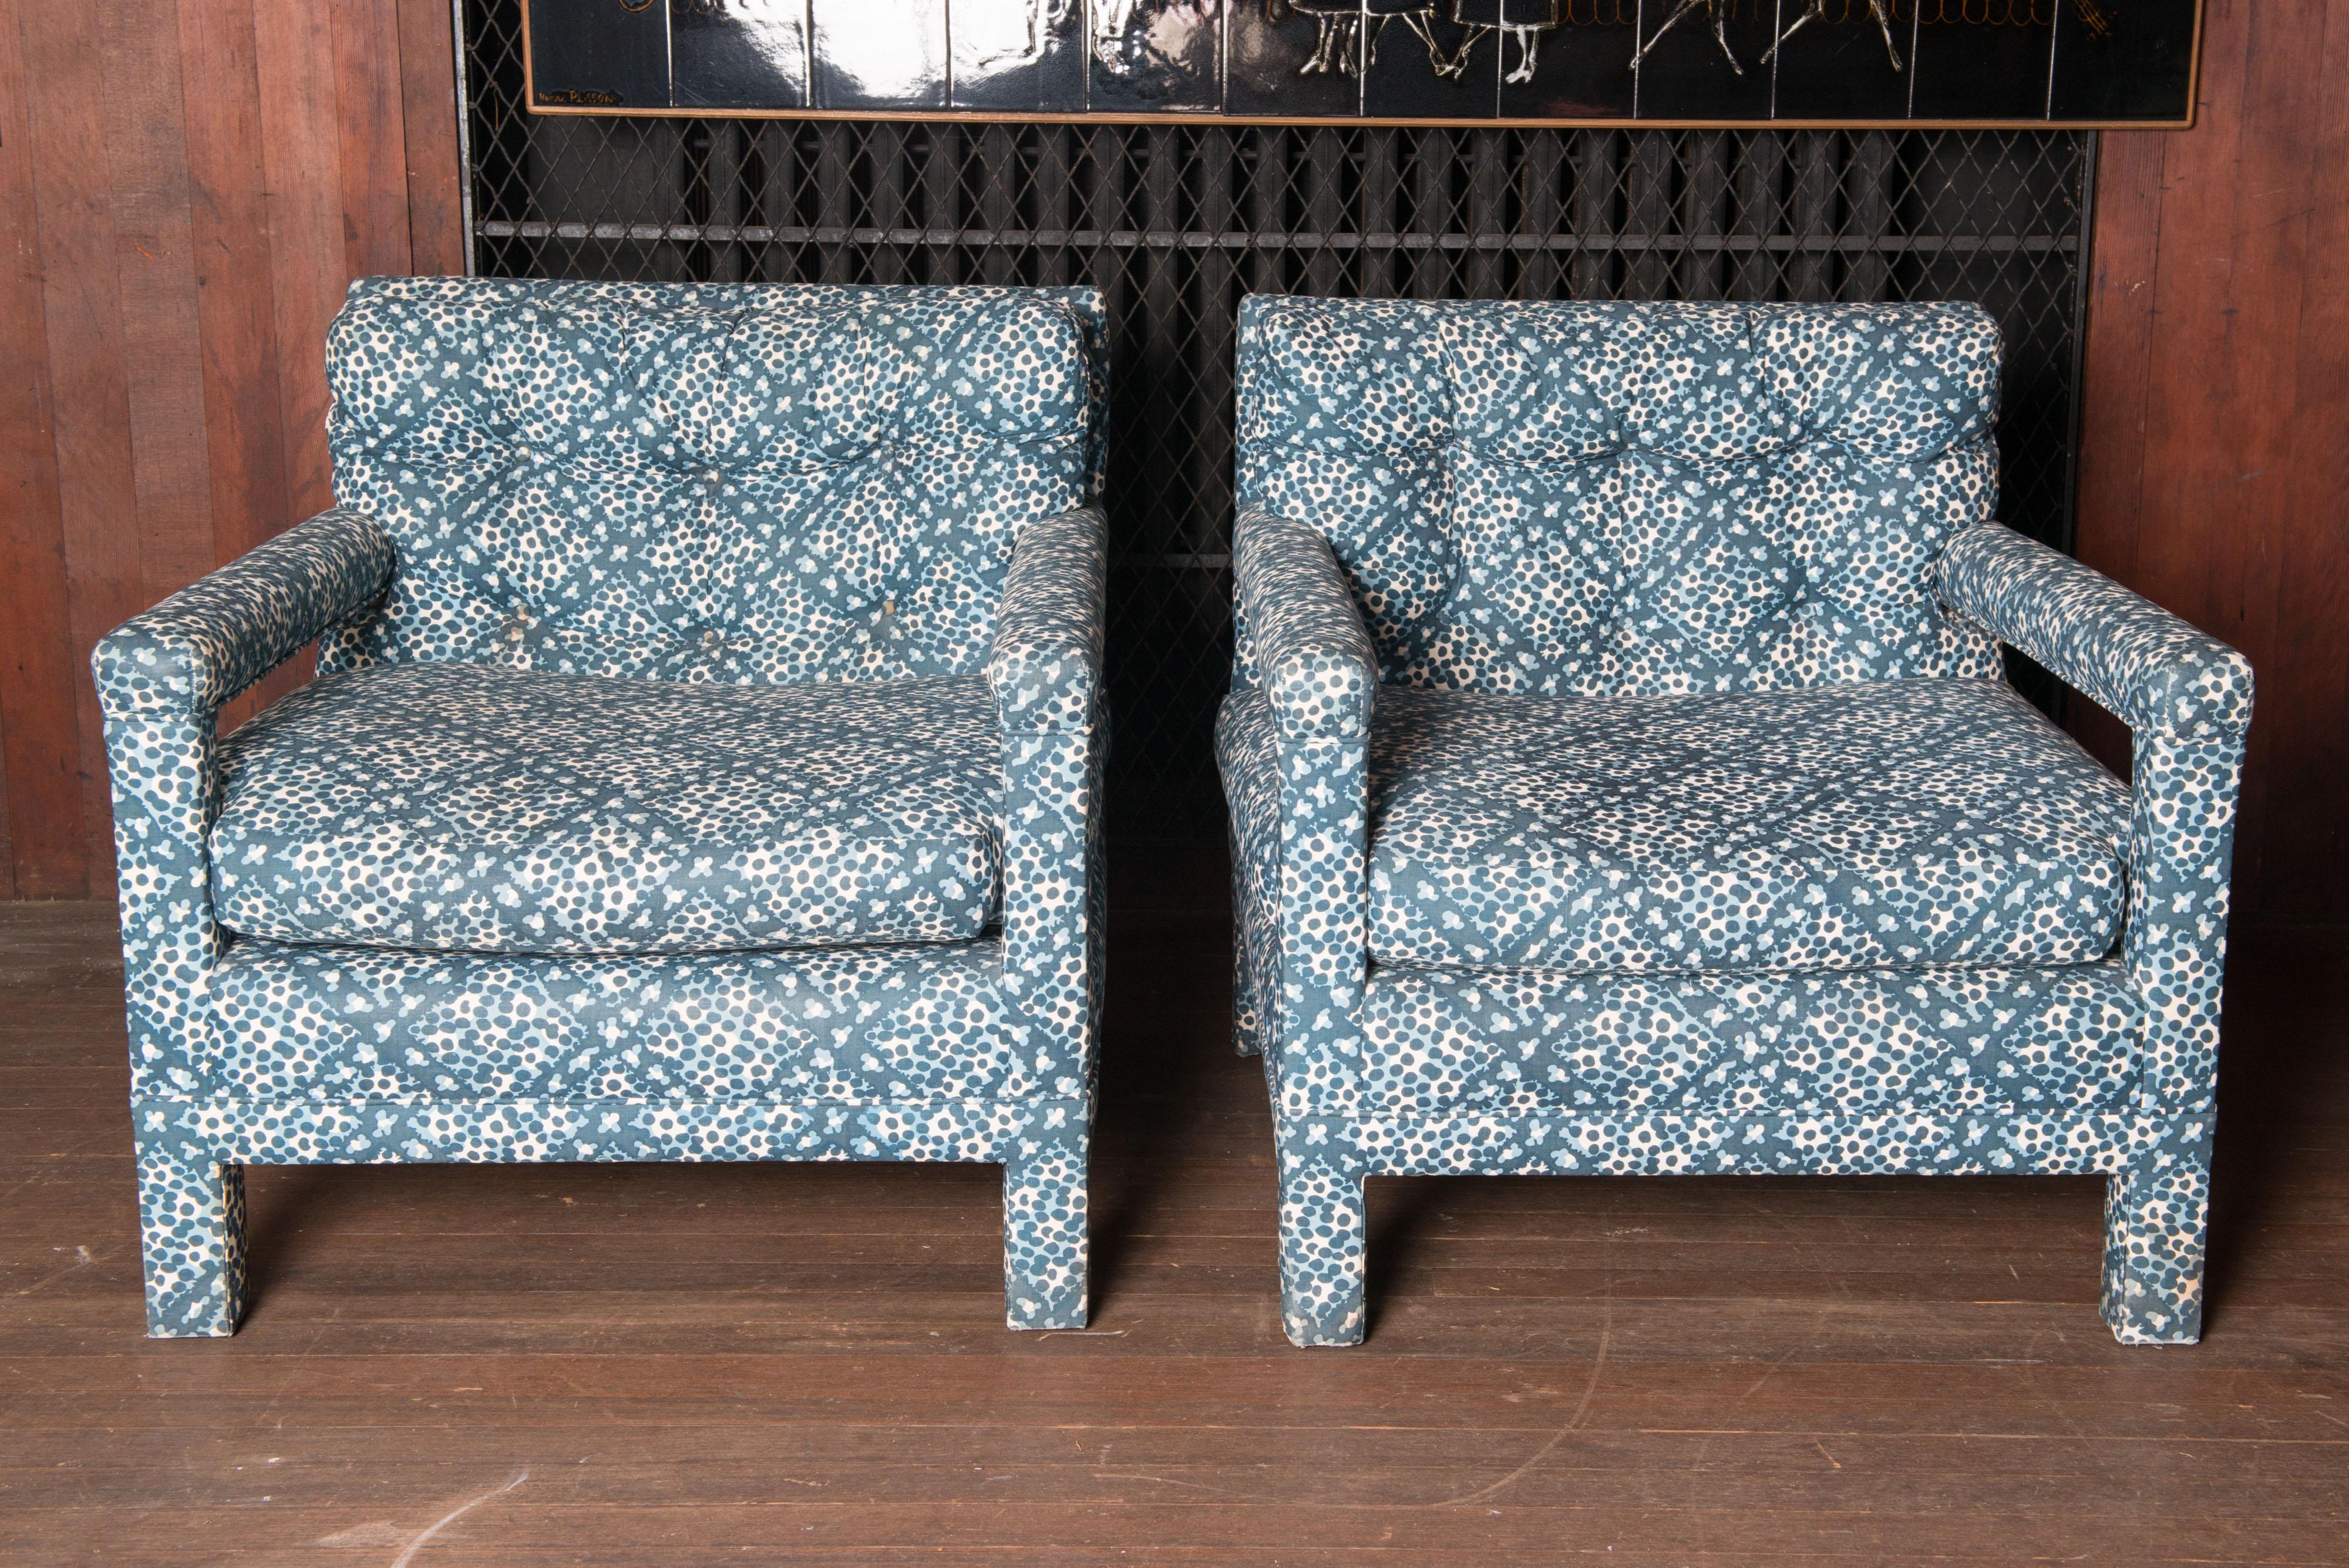 Pair of Milo Baughman style all upholstered Parsons lounge chairs from the 1970s.
Seat backs are button tufted. Fabric is in good condition. Loose seat cushion. Tight back cushion. Roomy comfortable chairs. This style is right out of the David Hicks